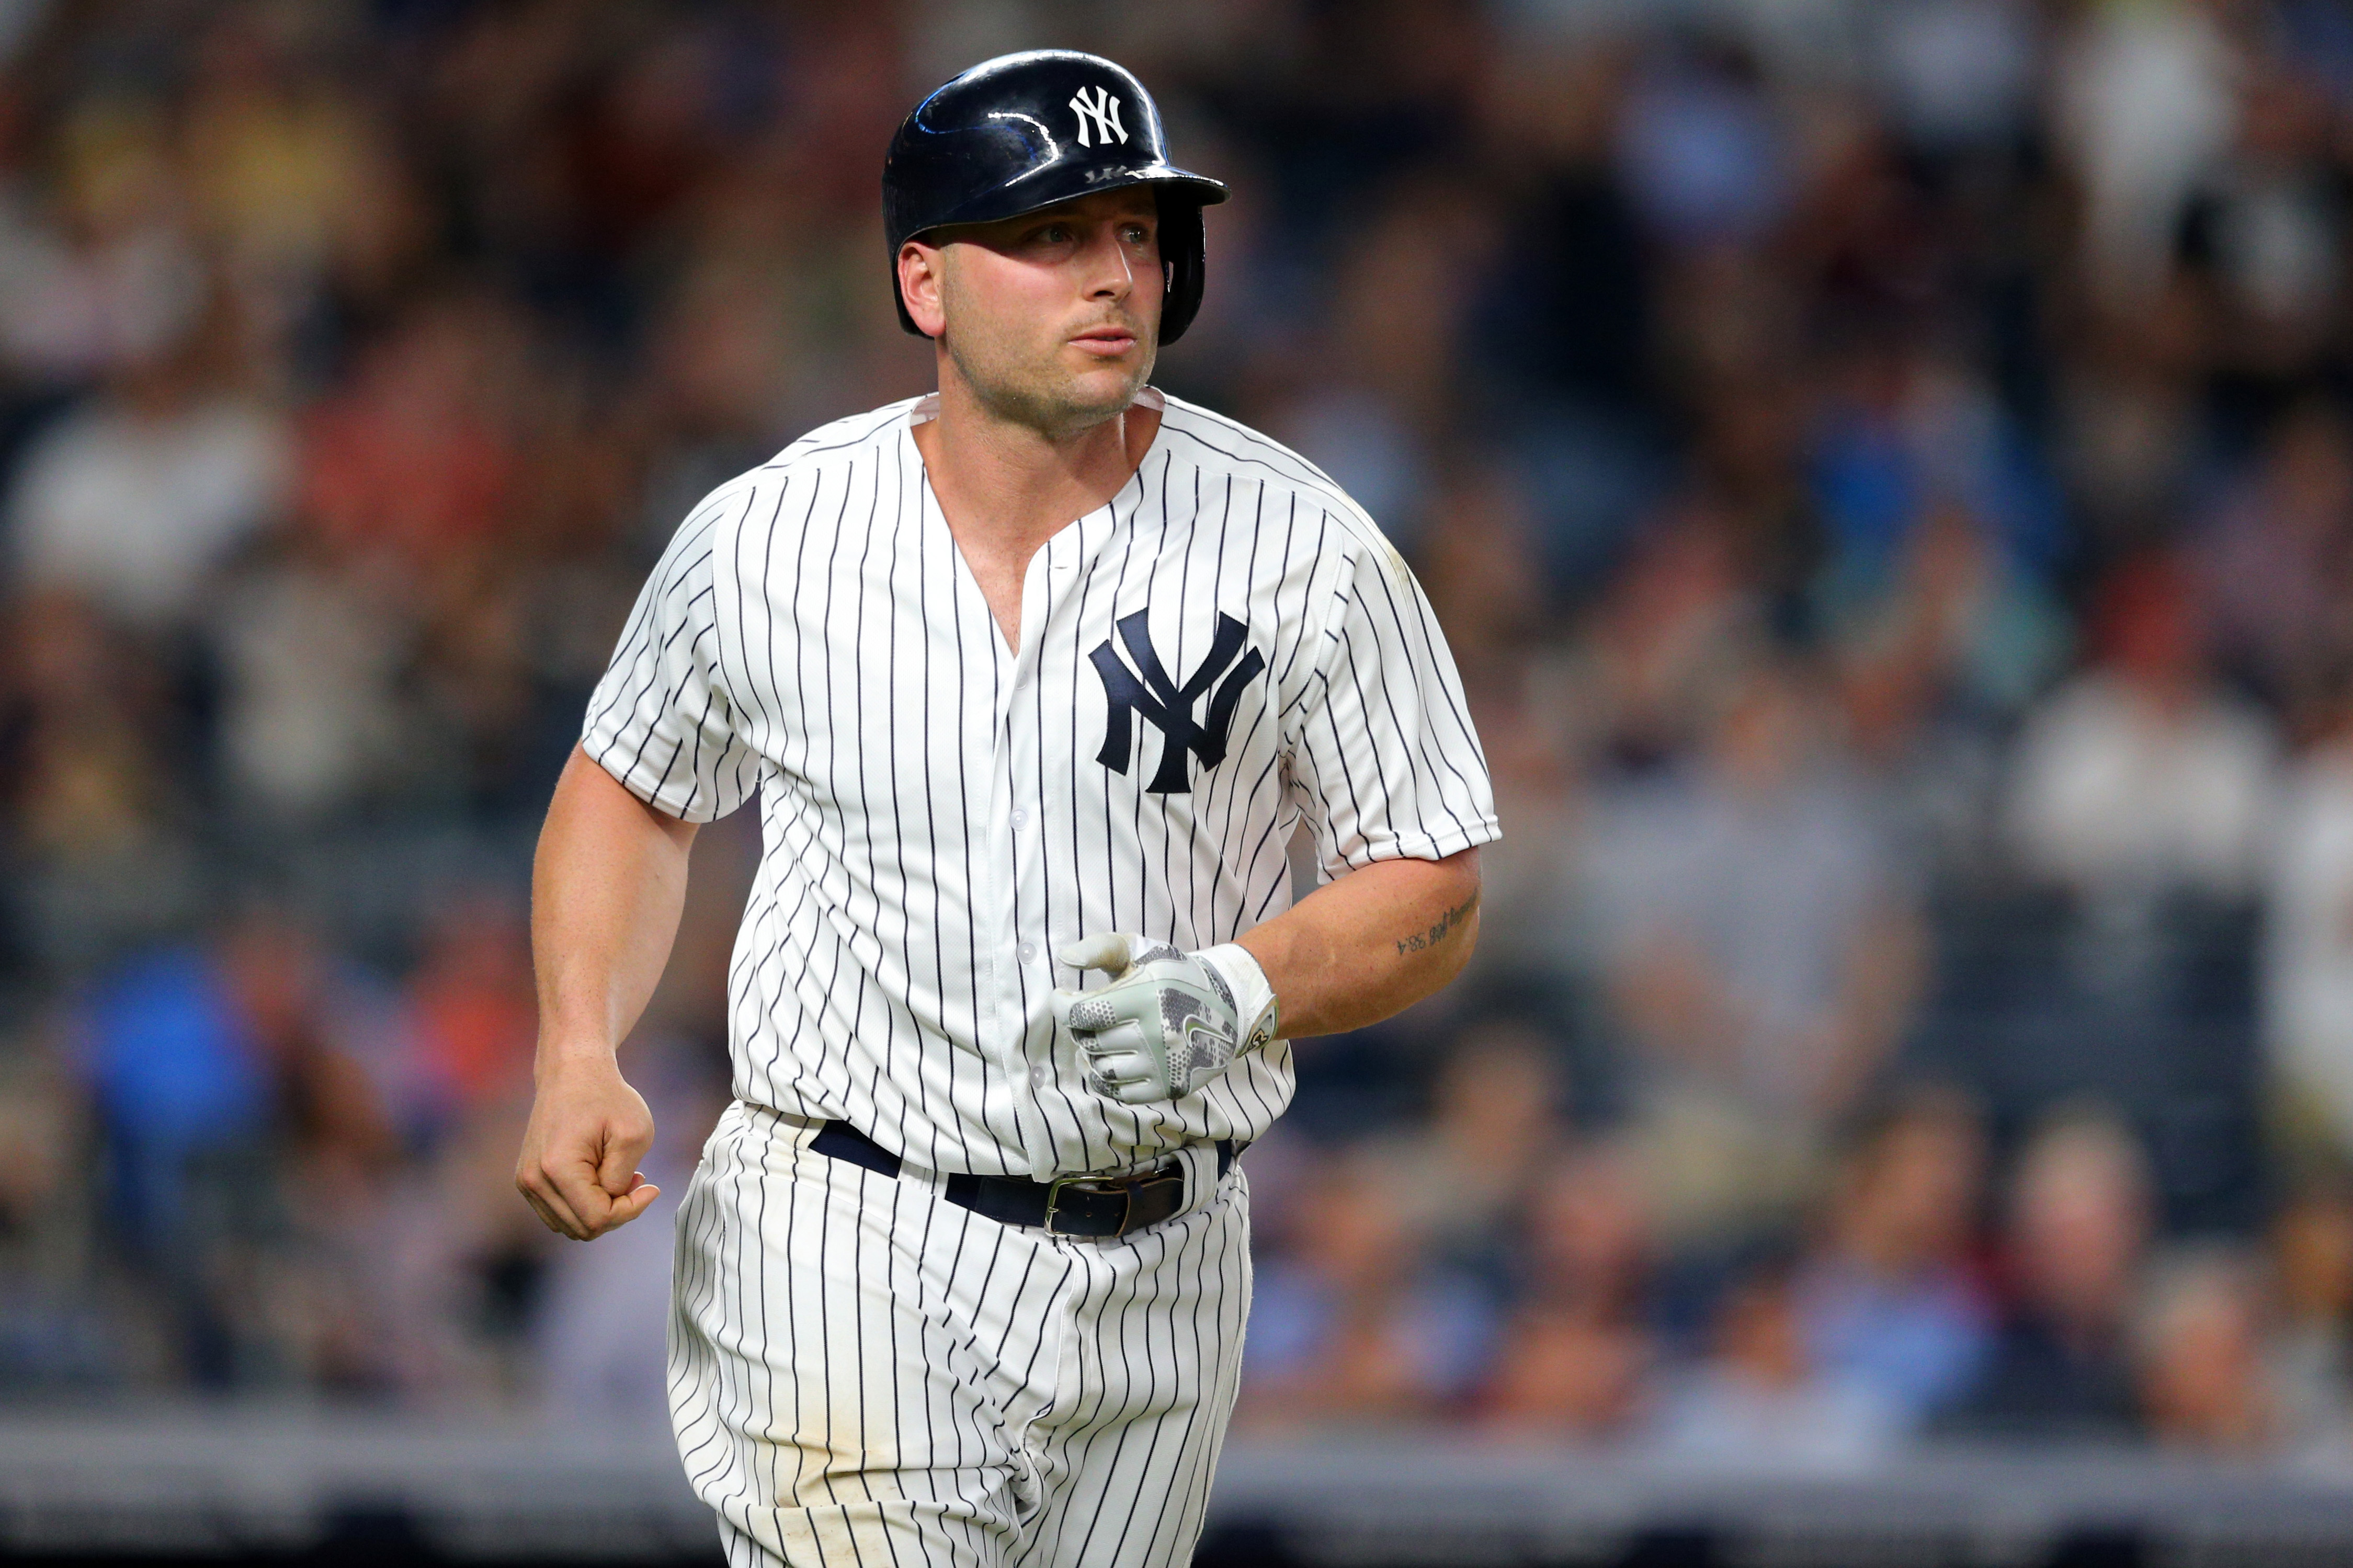 7-Time MLB All-Star, Matt Holliday is officially an Isotope